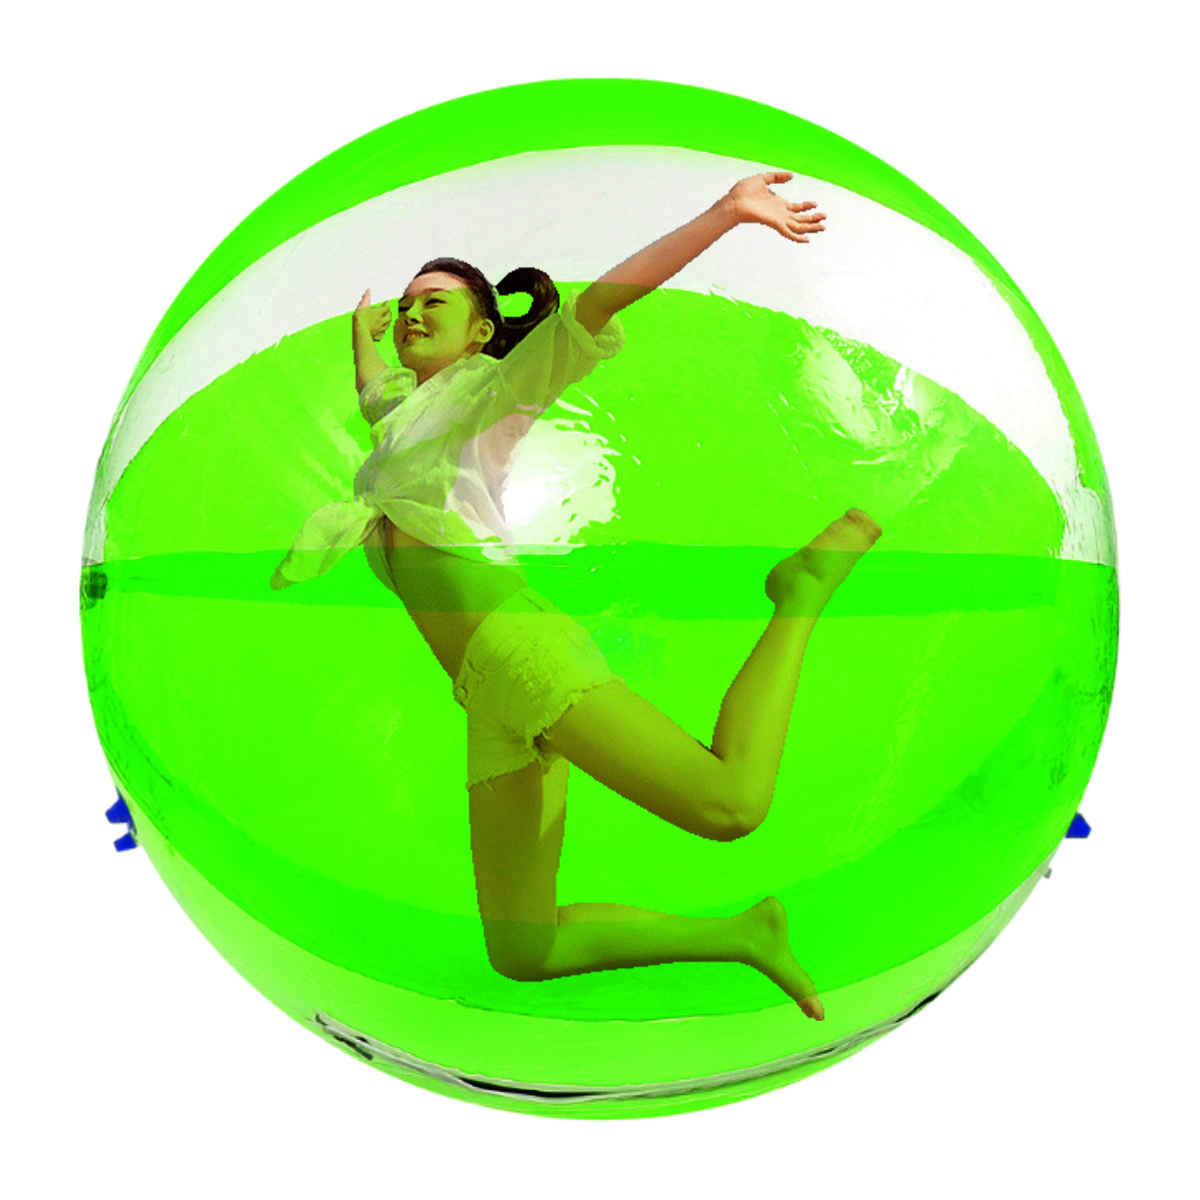 2M66ft-Inflatable-Float-PVC-Ball-Soft-Water-Walking-Ball-With-Zipper-Swimming-Pool-Rolling-Dance-Bal-1710295-3